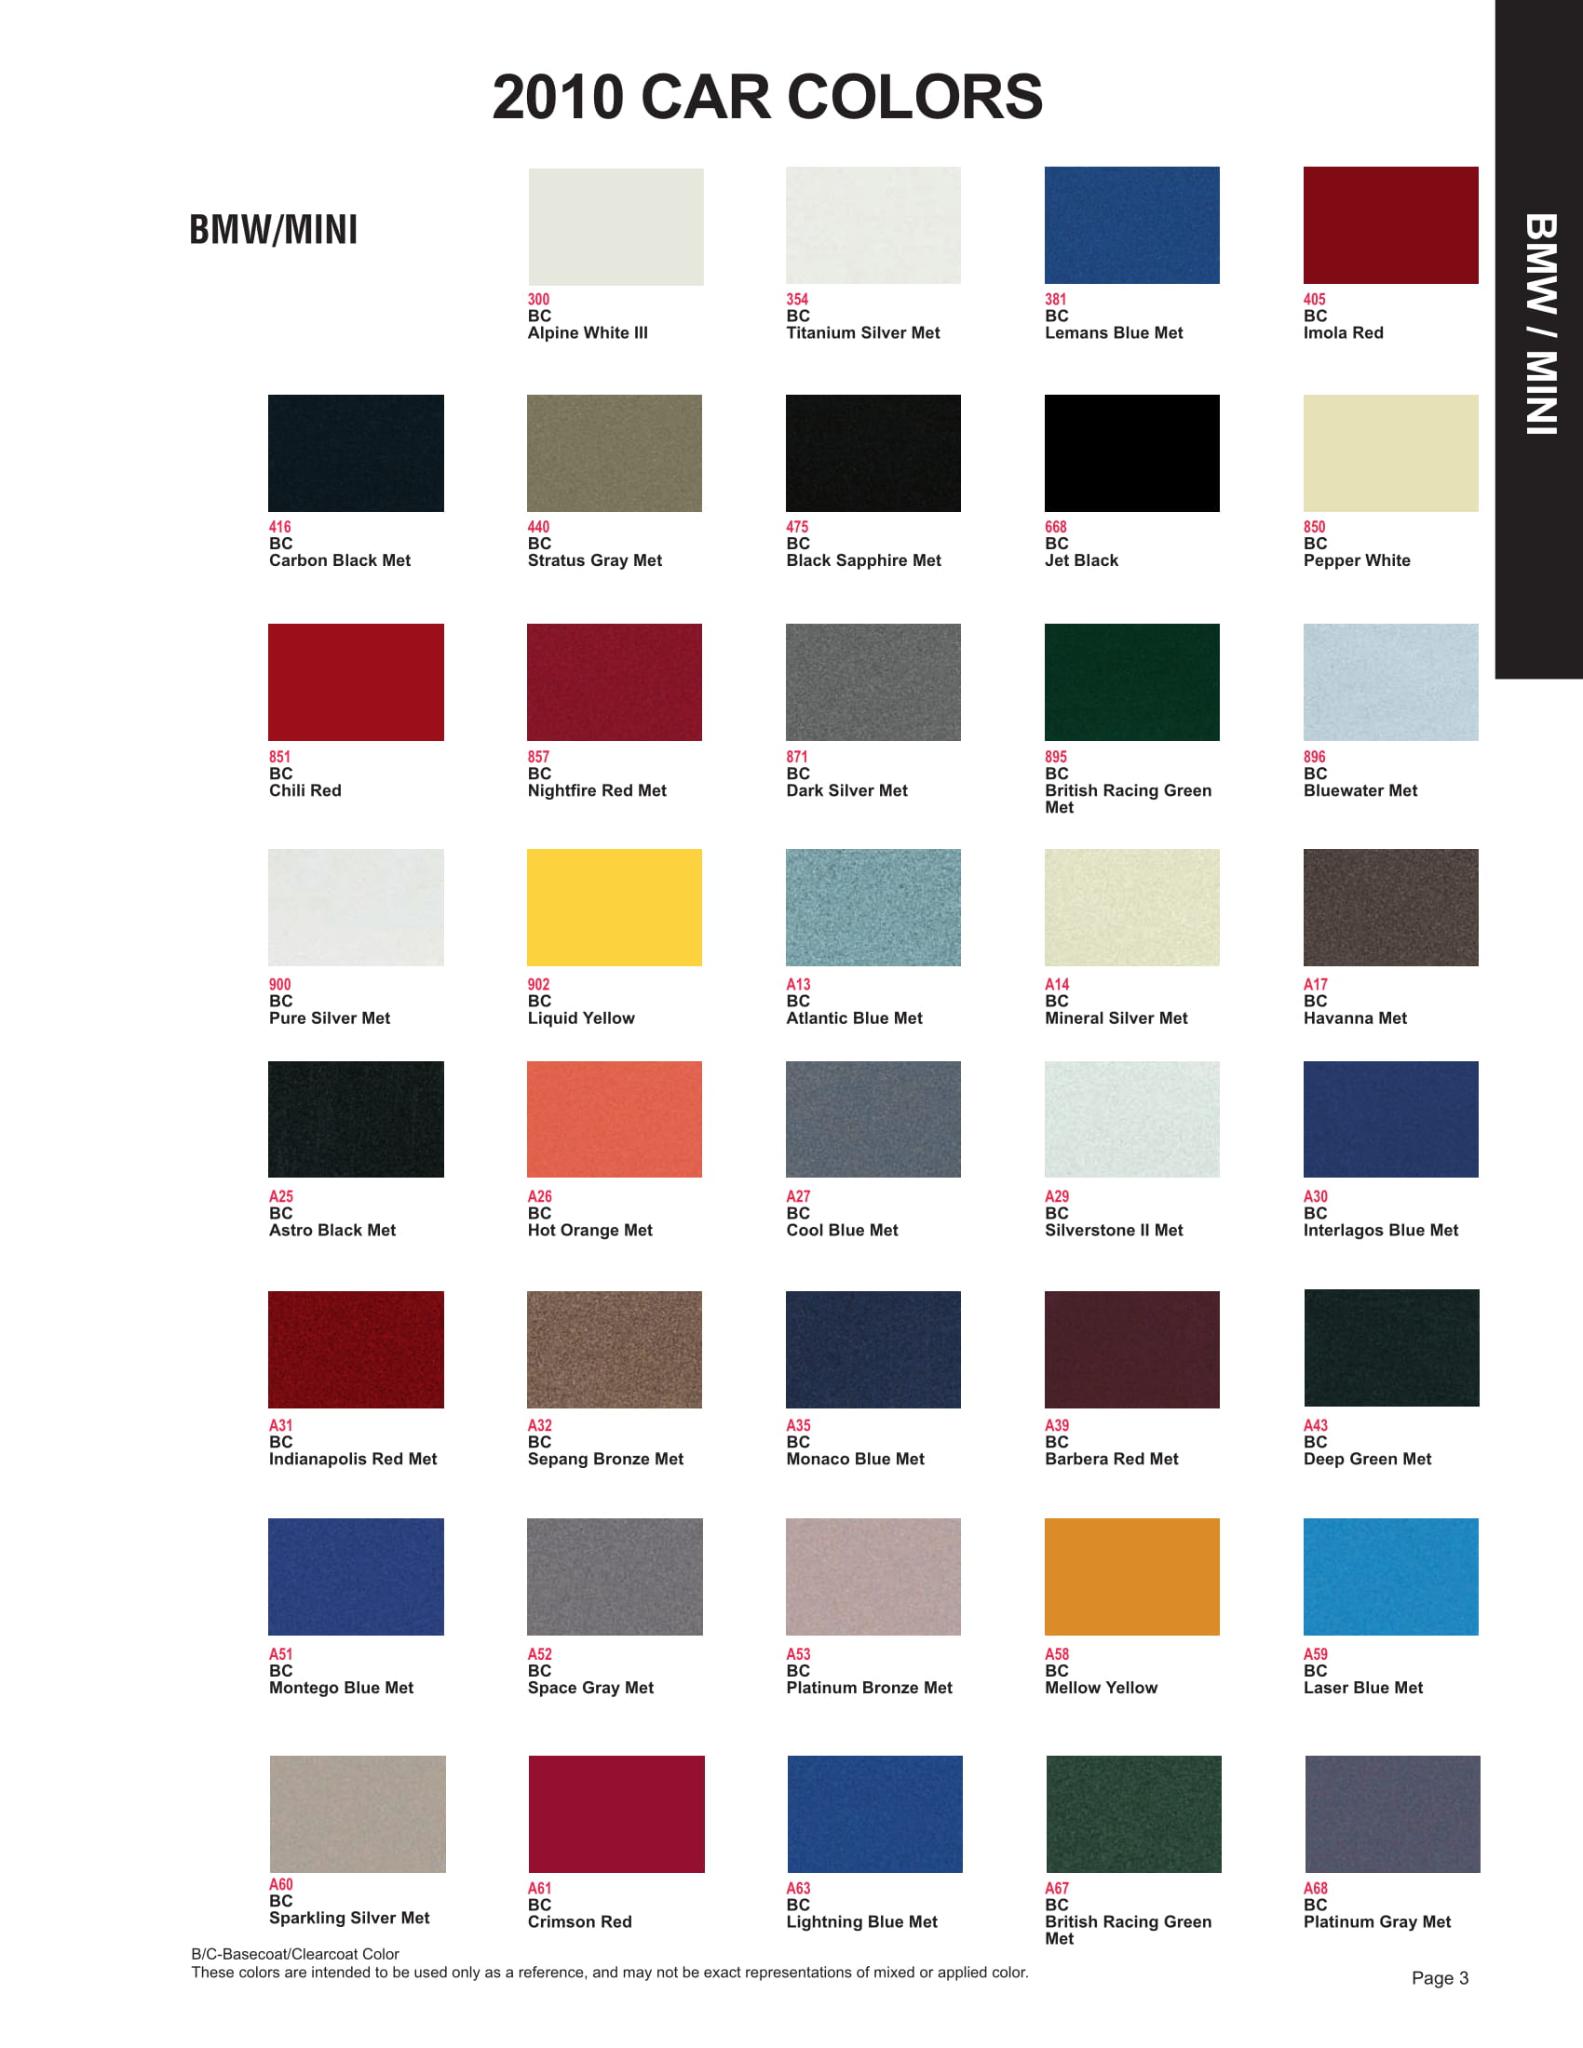 Paint Chips for Exterior, Interior, and Wheel Colors For BMW & Mini Cooper Colors in 2010